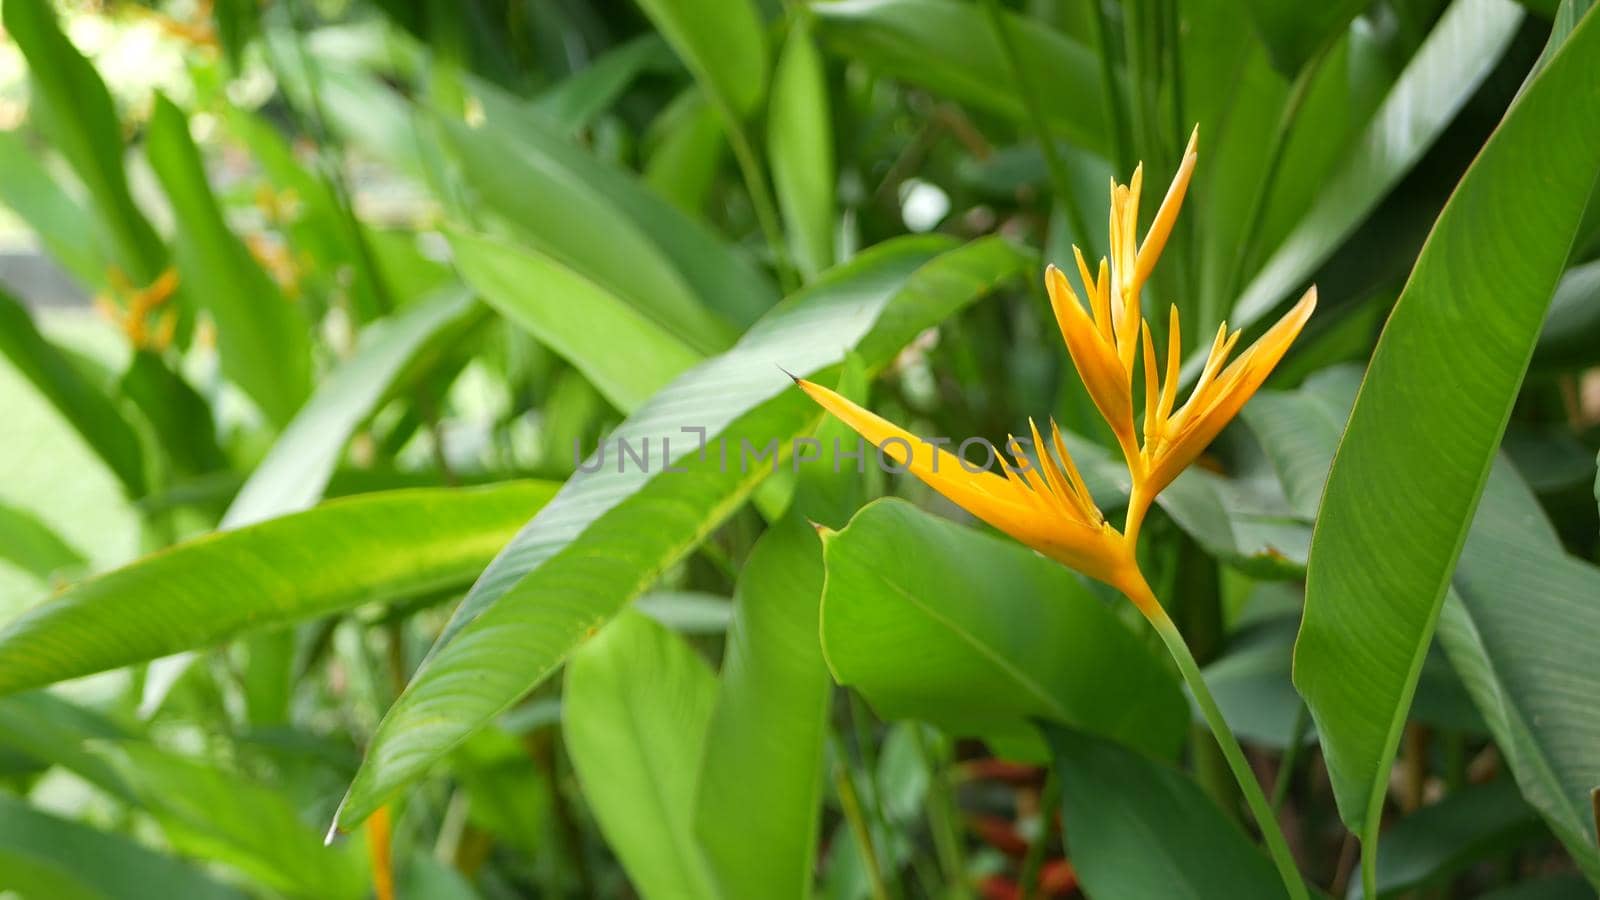 Orange and yellow heliconia, Strelitzia, Bird of Paradise macro close-up, green leaves in background. Paradise tropical exotic flower blooming in rainforest or garden. Soft selective focus, copy space